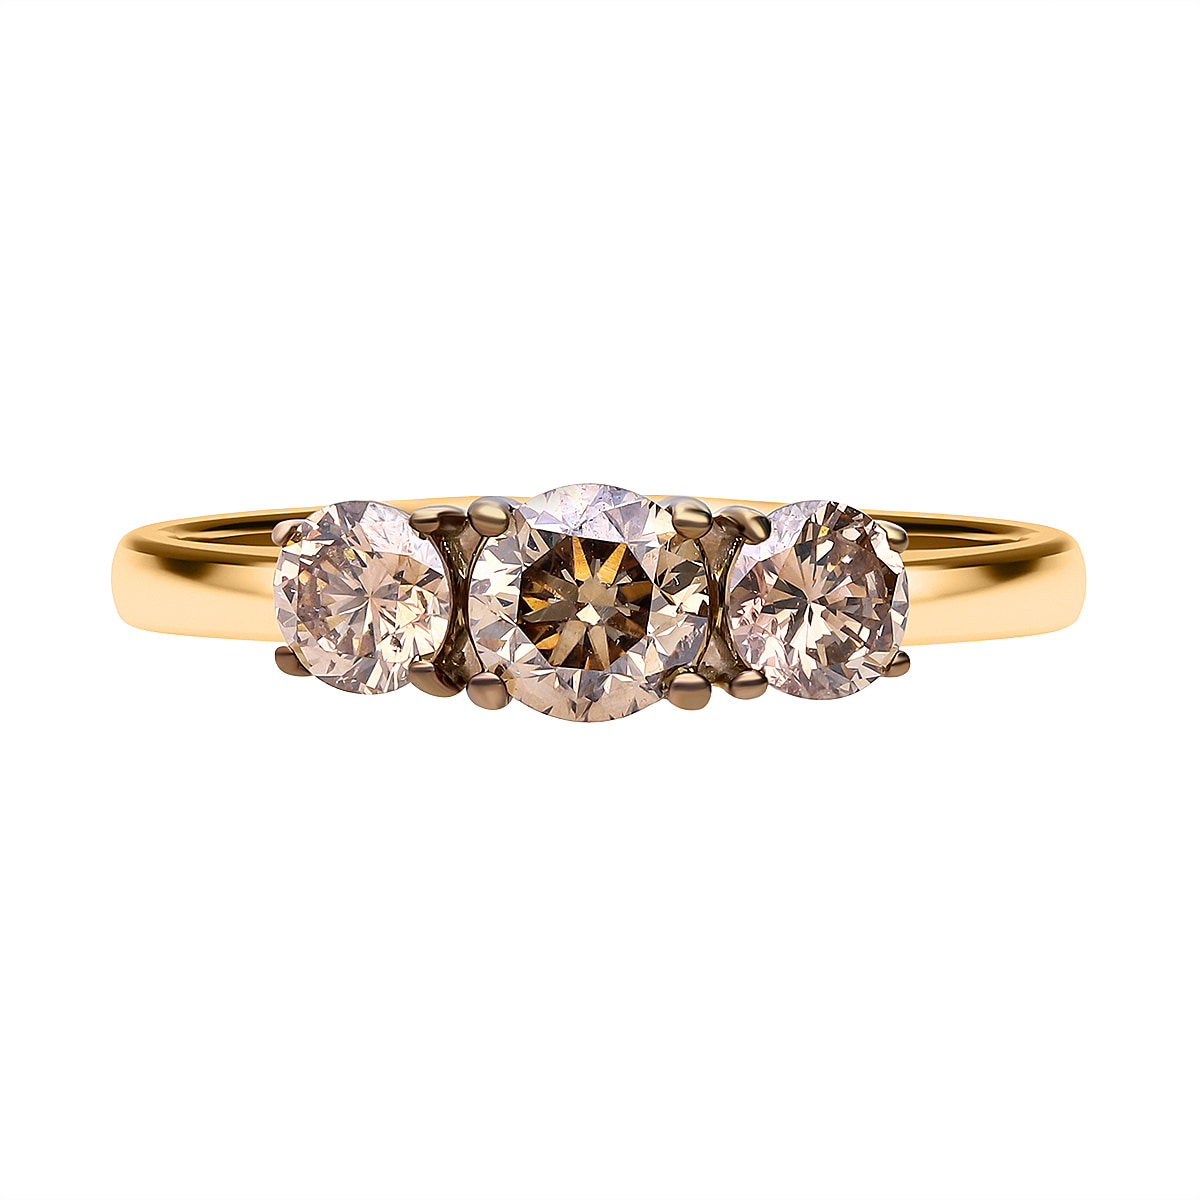 One Time Deal- 9K Yellow Gold Certified Natural Champagne Diamond Trilogy Ring 1.00 Cts